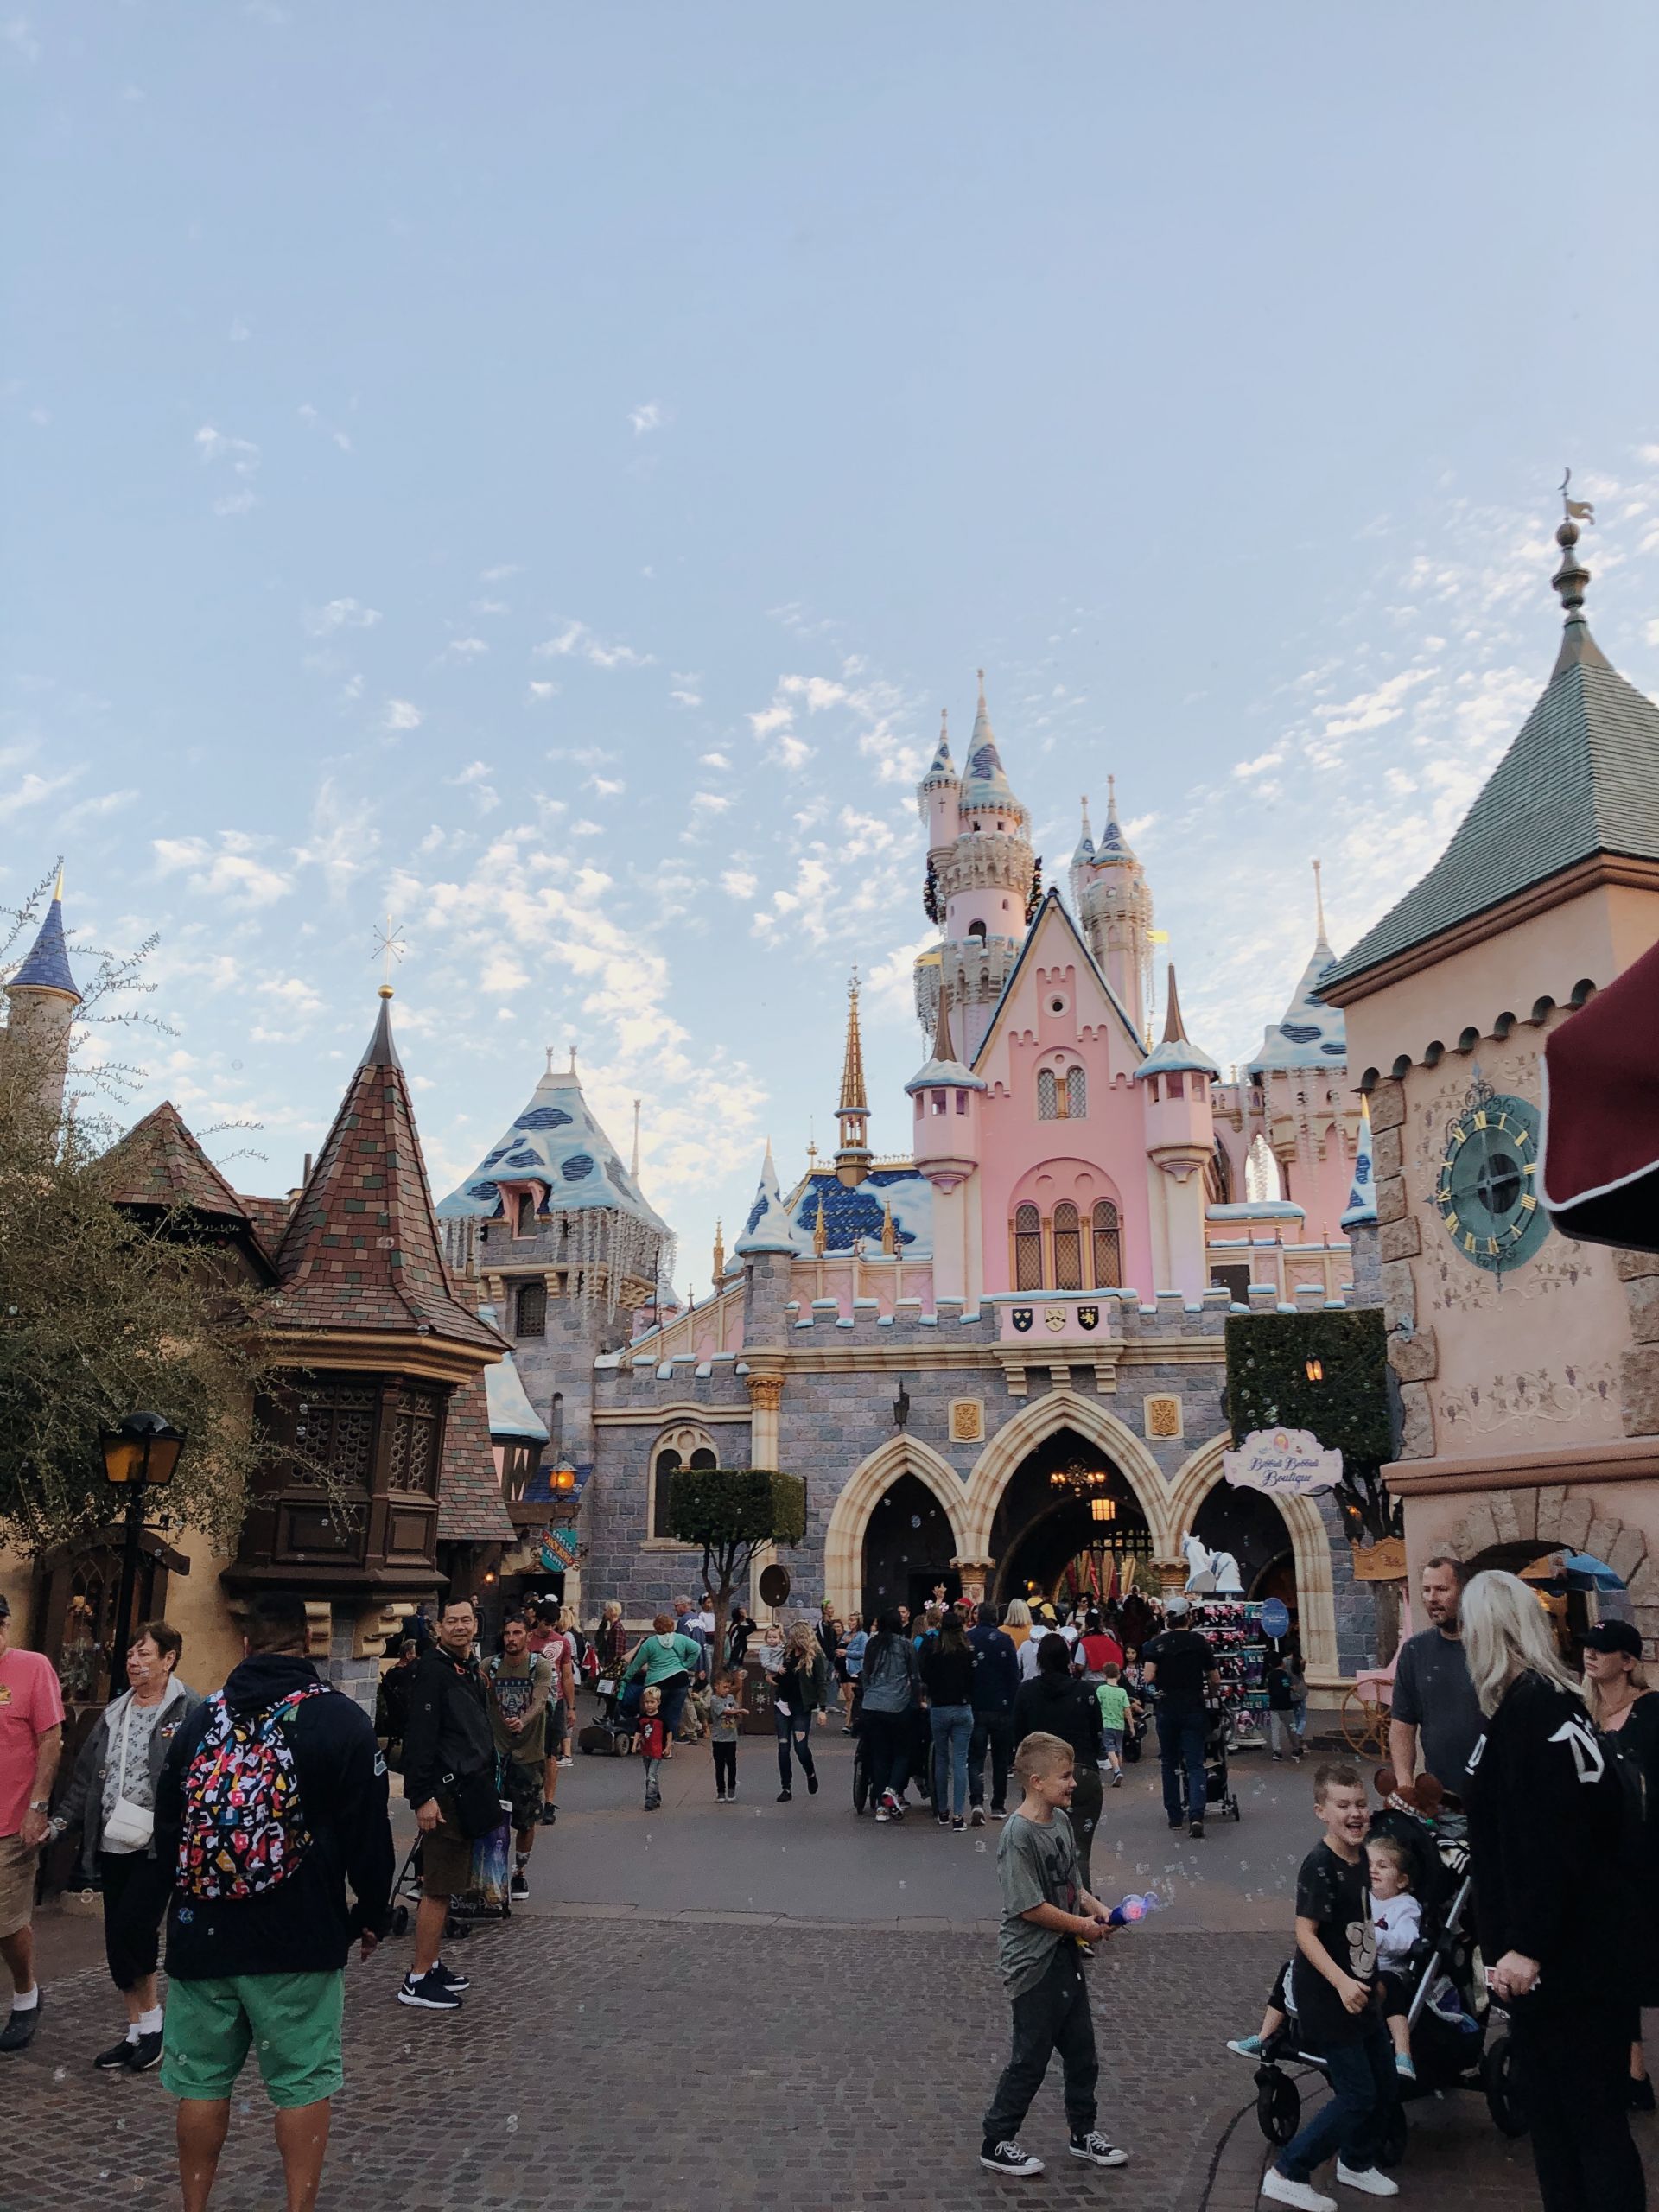 How to Spend 4 Days in Disneyland